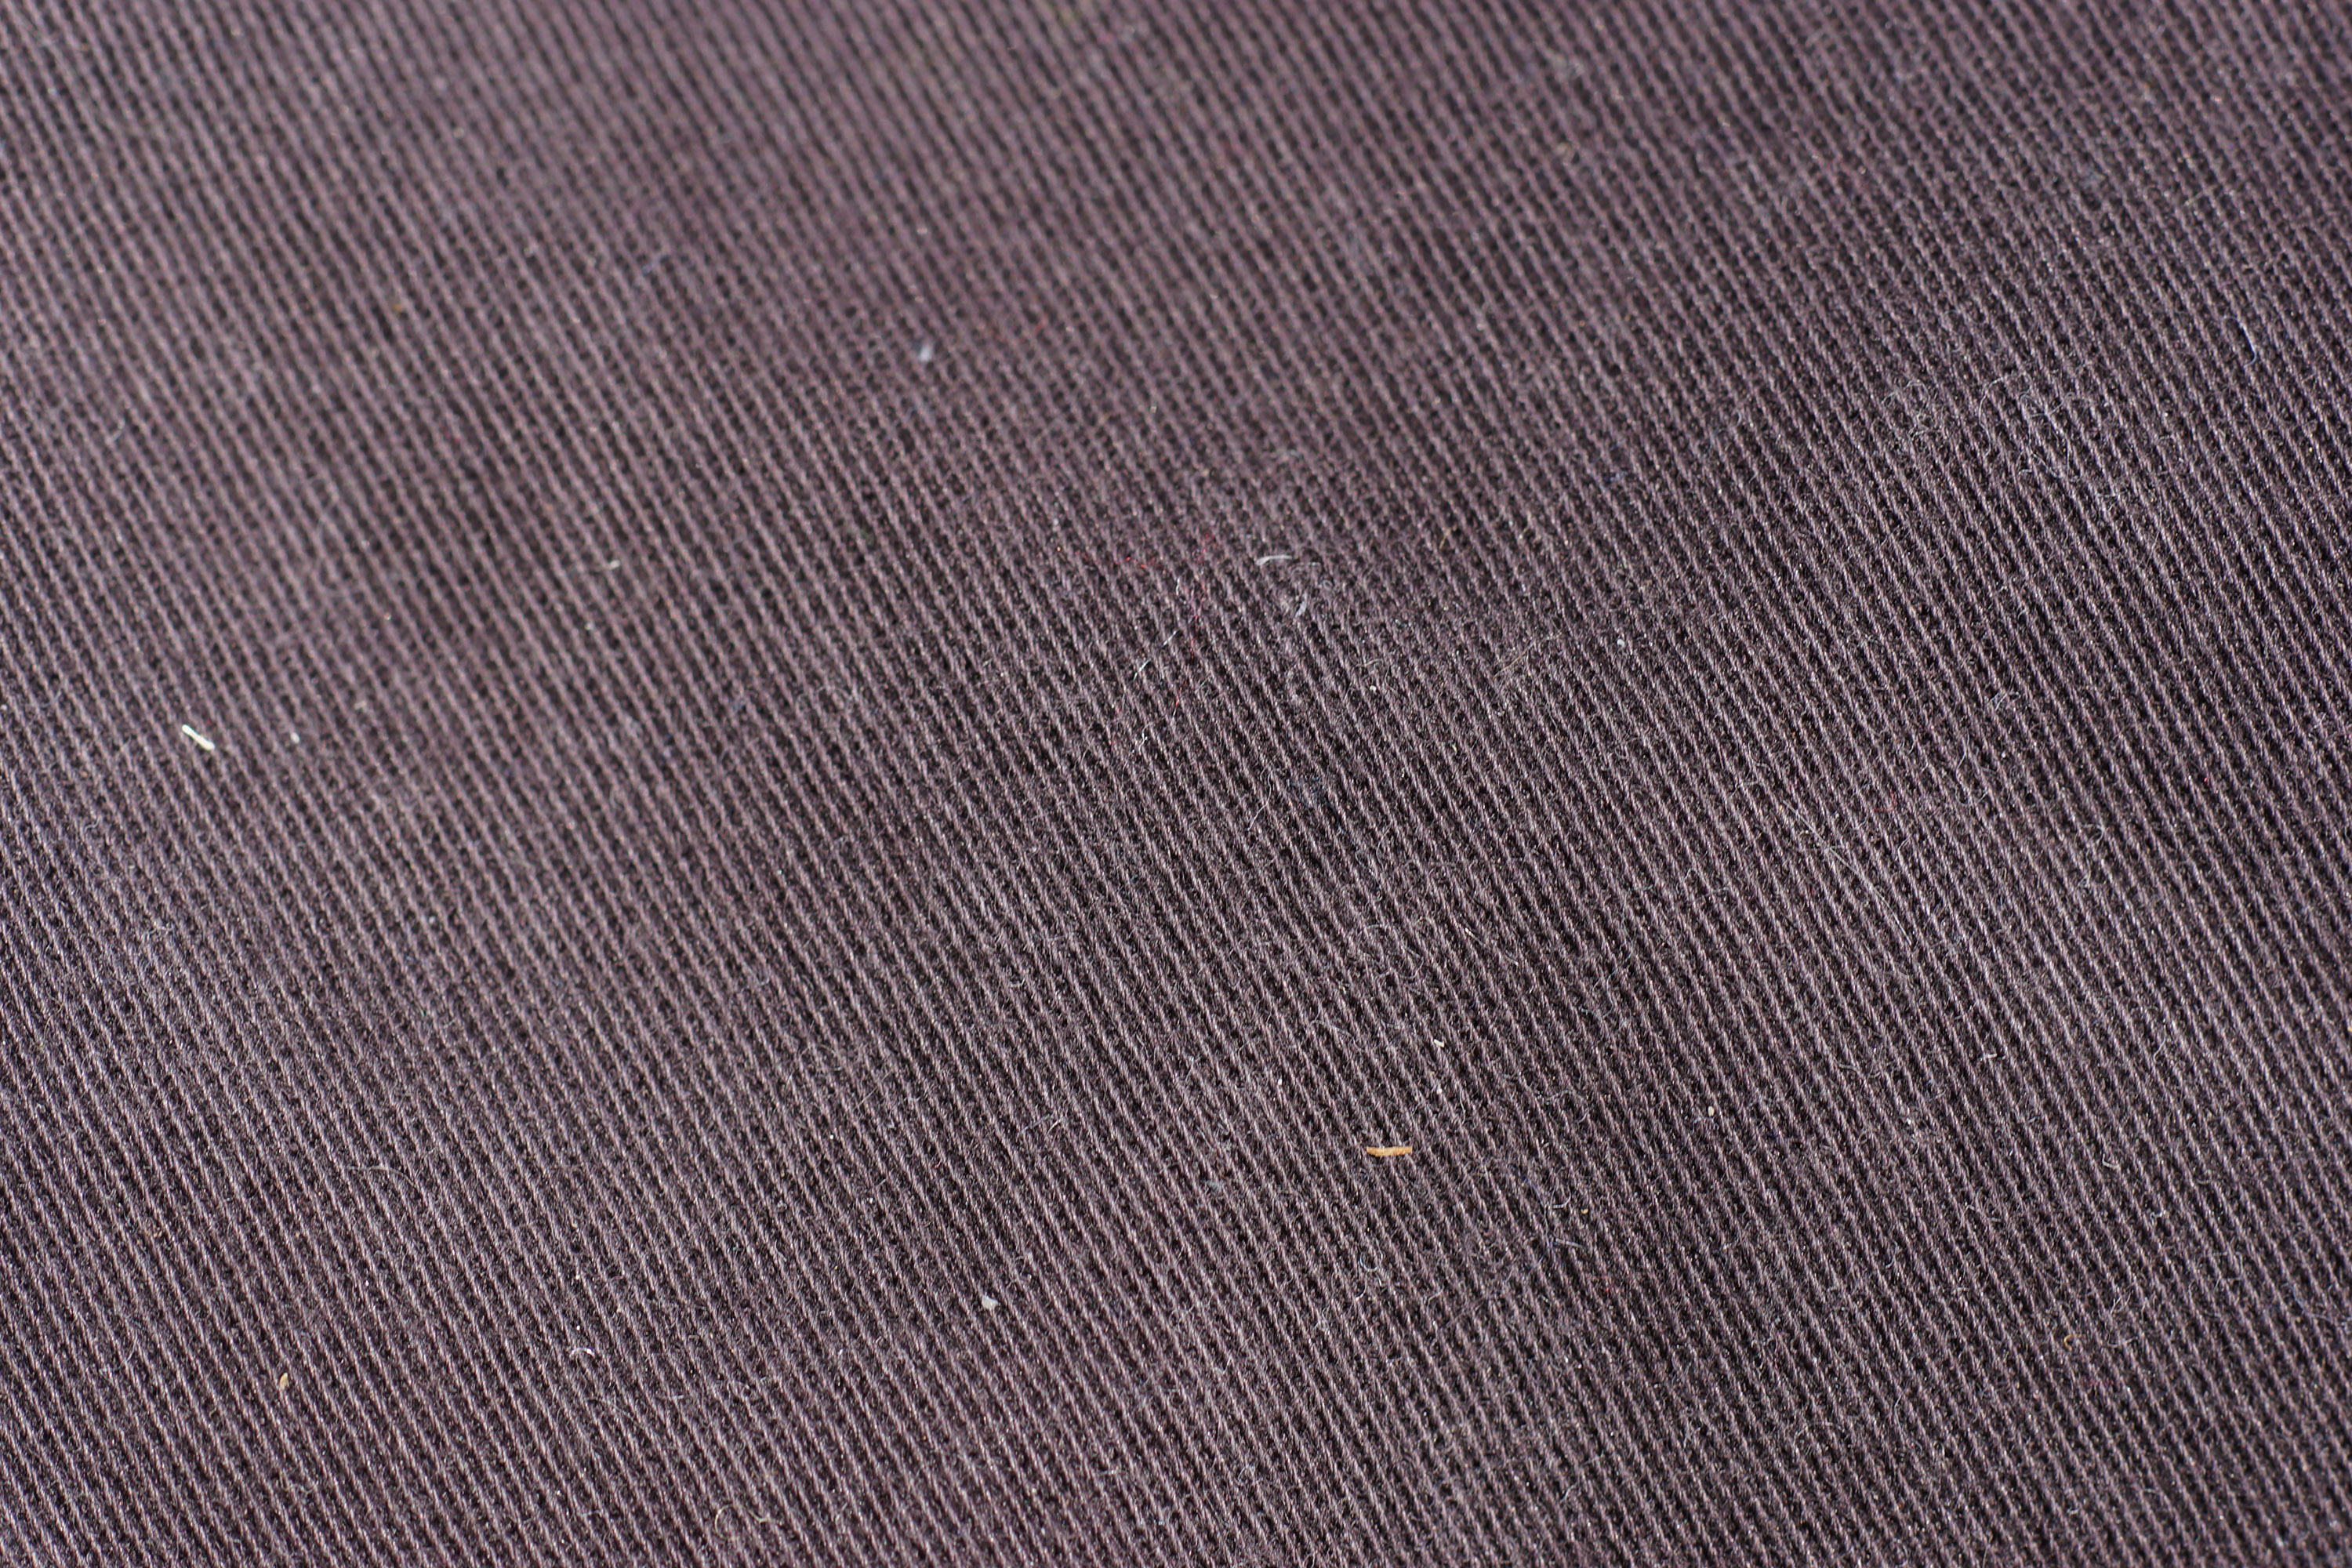 Two background images of a brown fabric texture